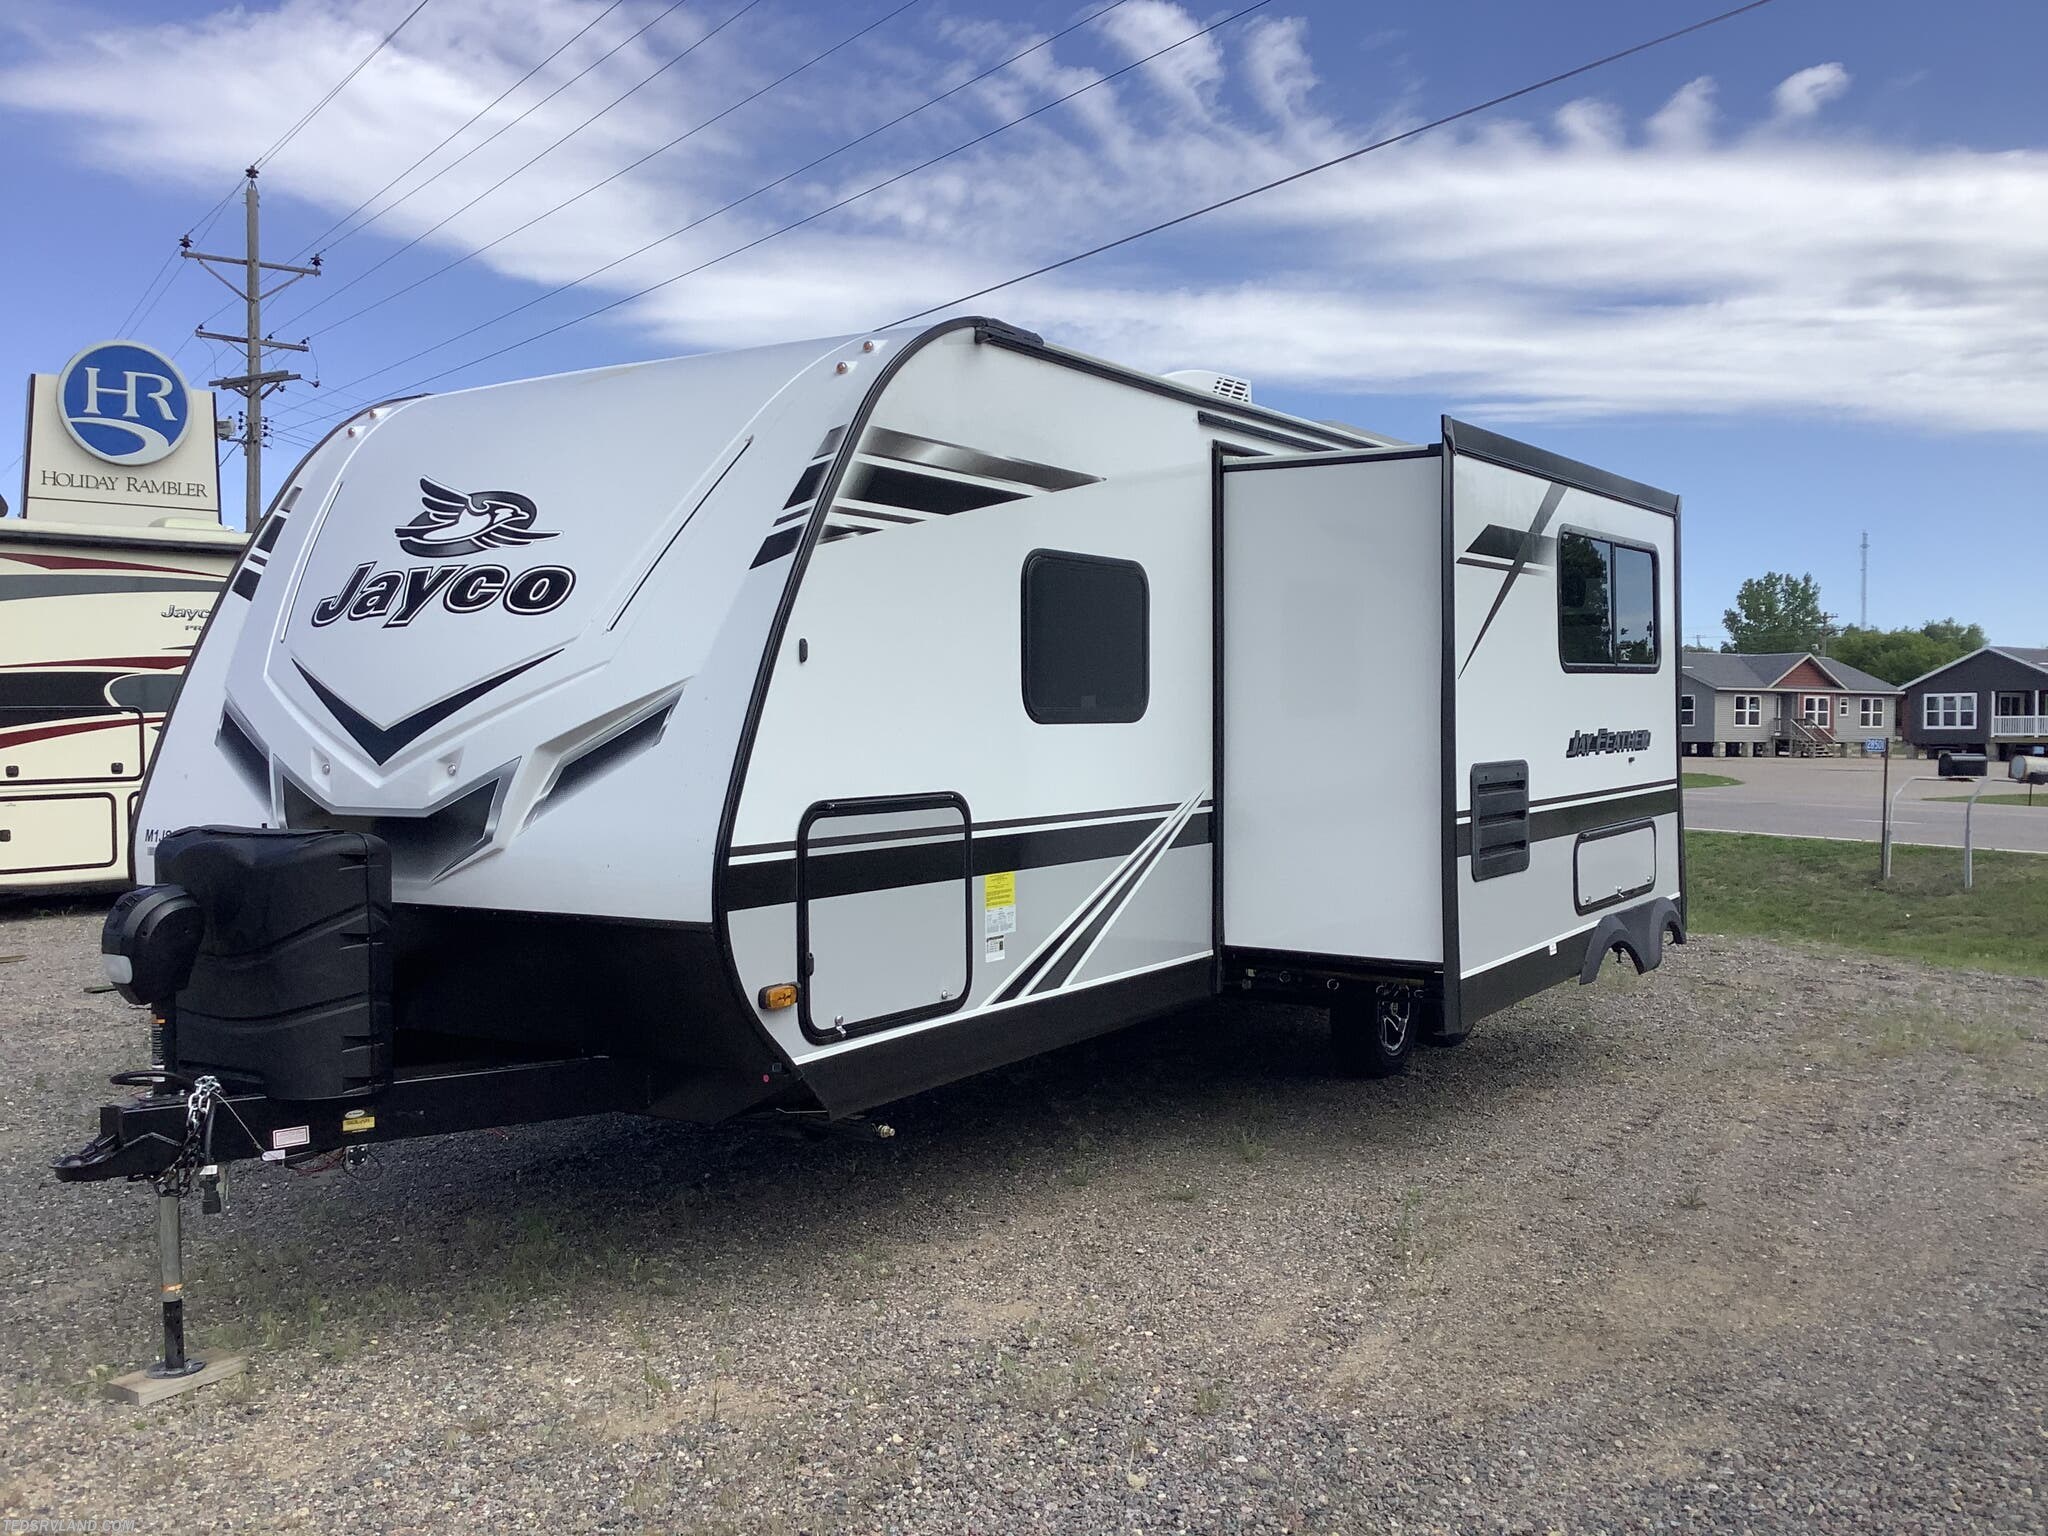 2022 Jayco Jay Feather 24BH RV for Sale in Paynesville, MN 56362 on